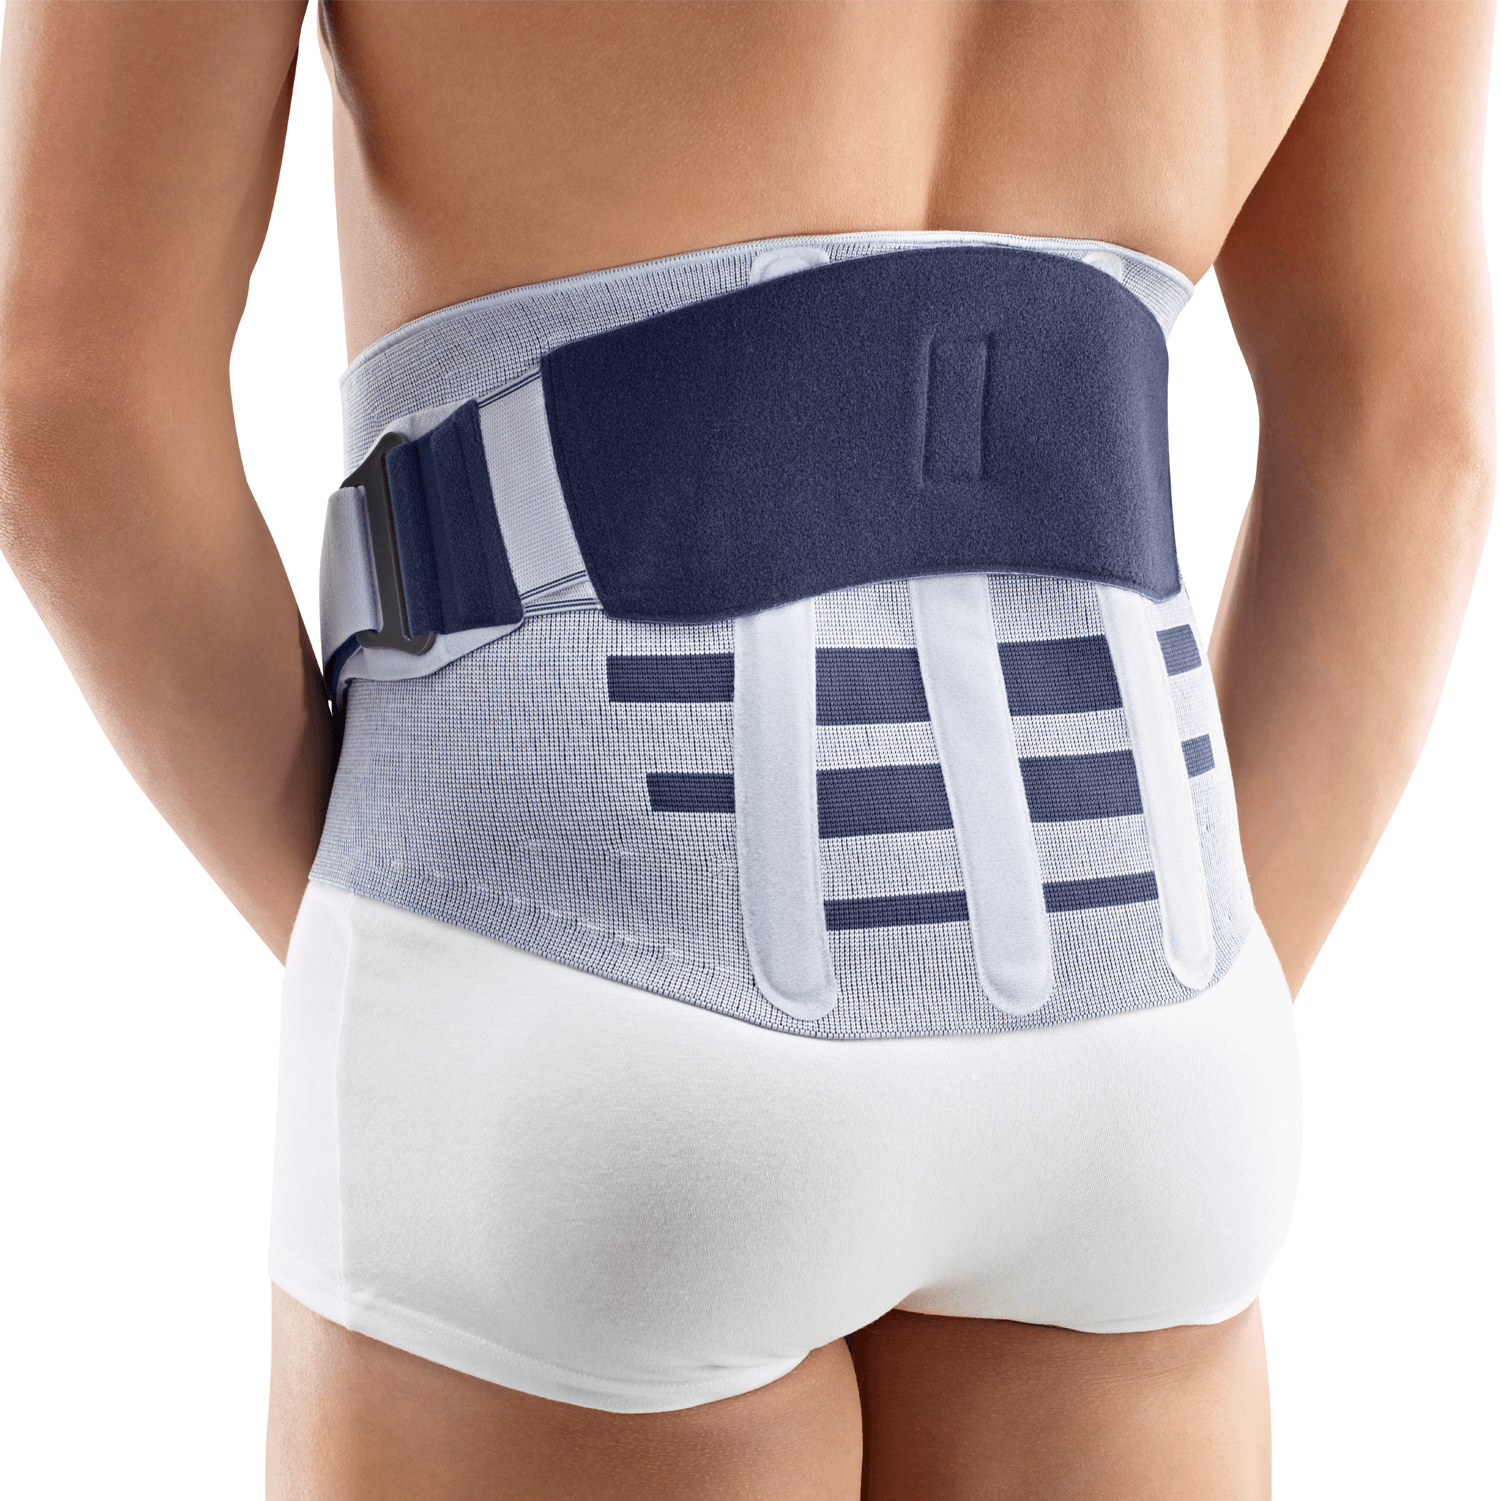 LumboTrain/Lady - Compression brace for relief and stabilization of the  lumbar spine - One Bracing